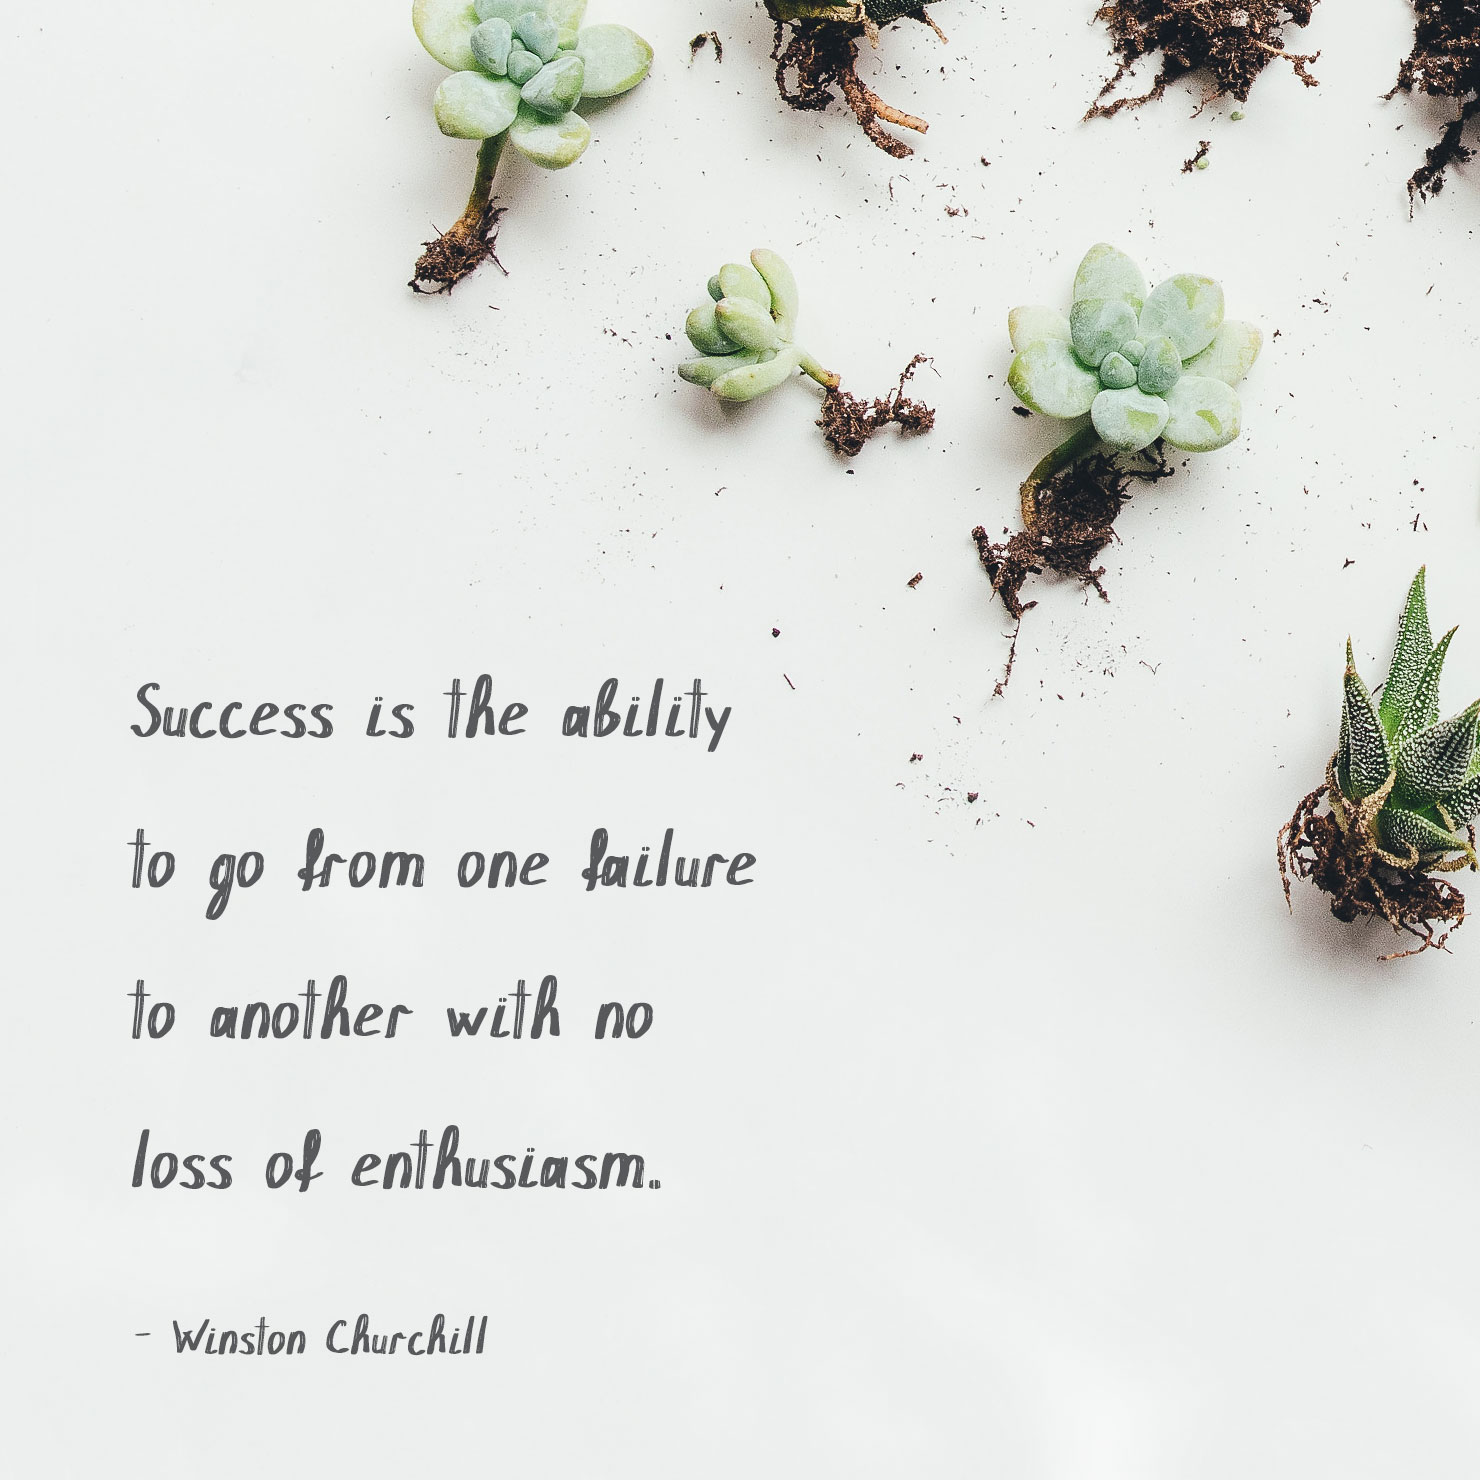 inspirational graduation quote: success is the ability to go from one failure to another with no loss of enthusiasm - Winston Churchill